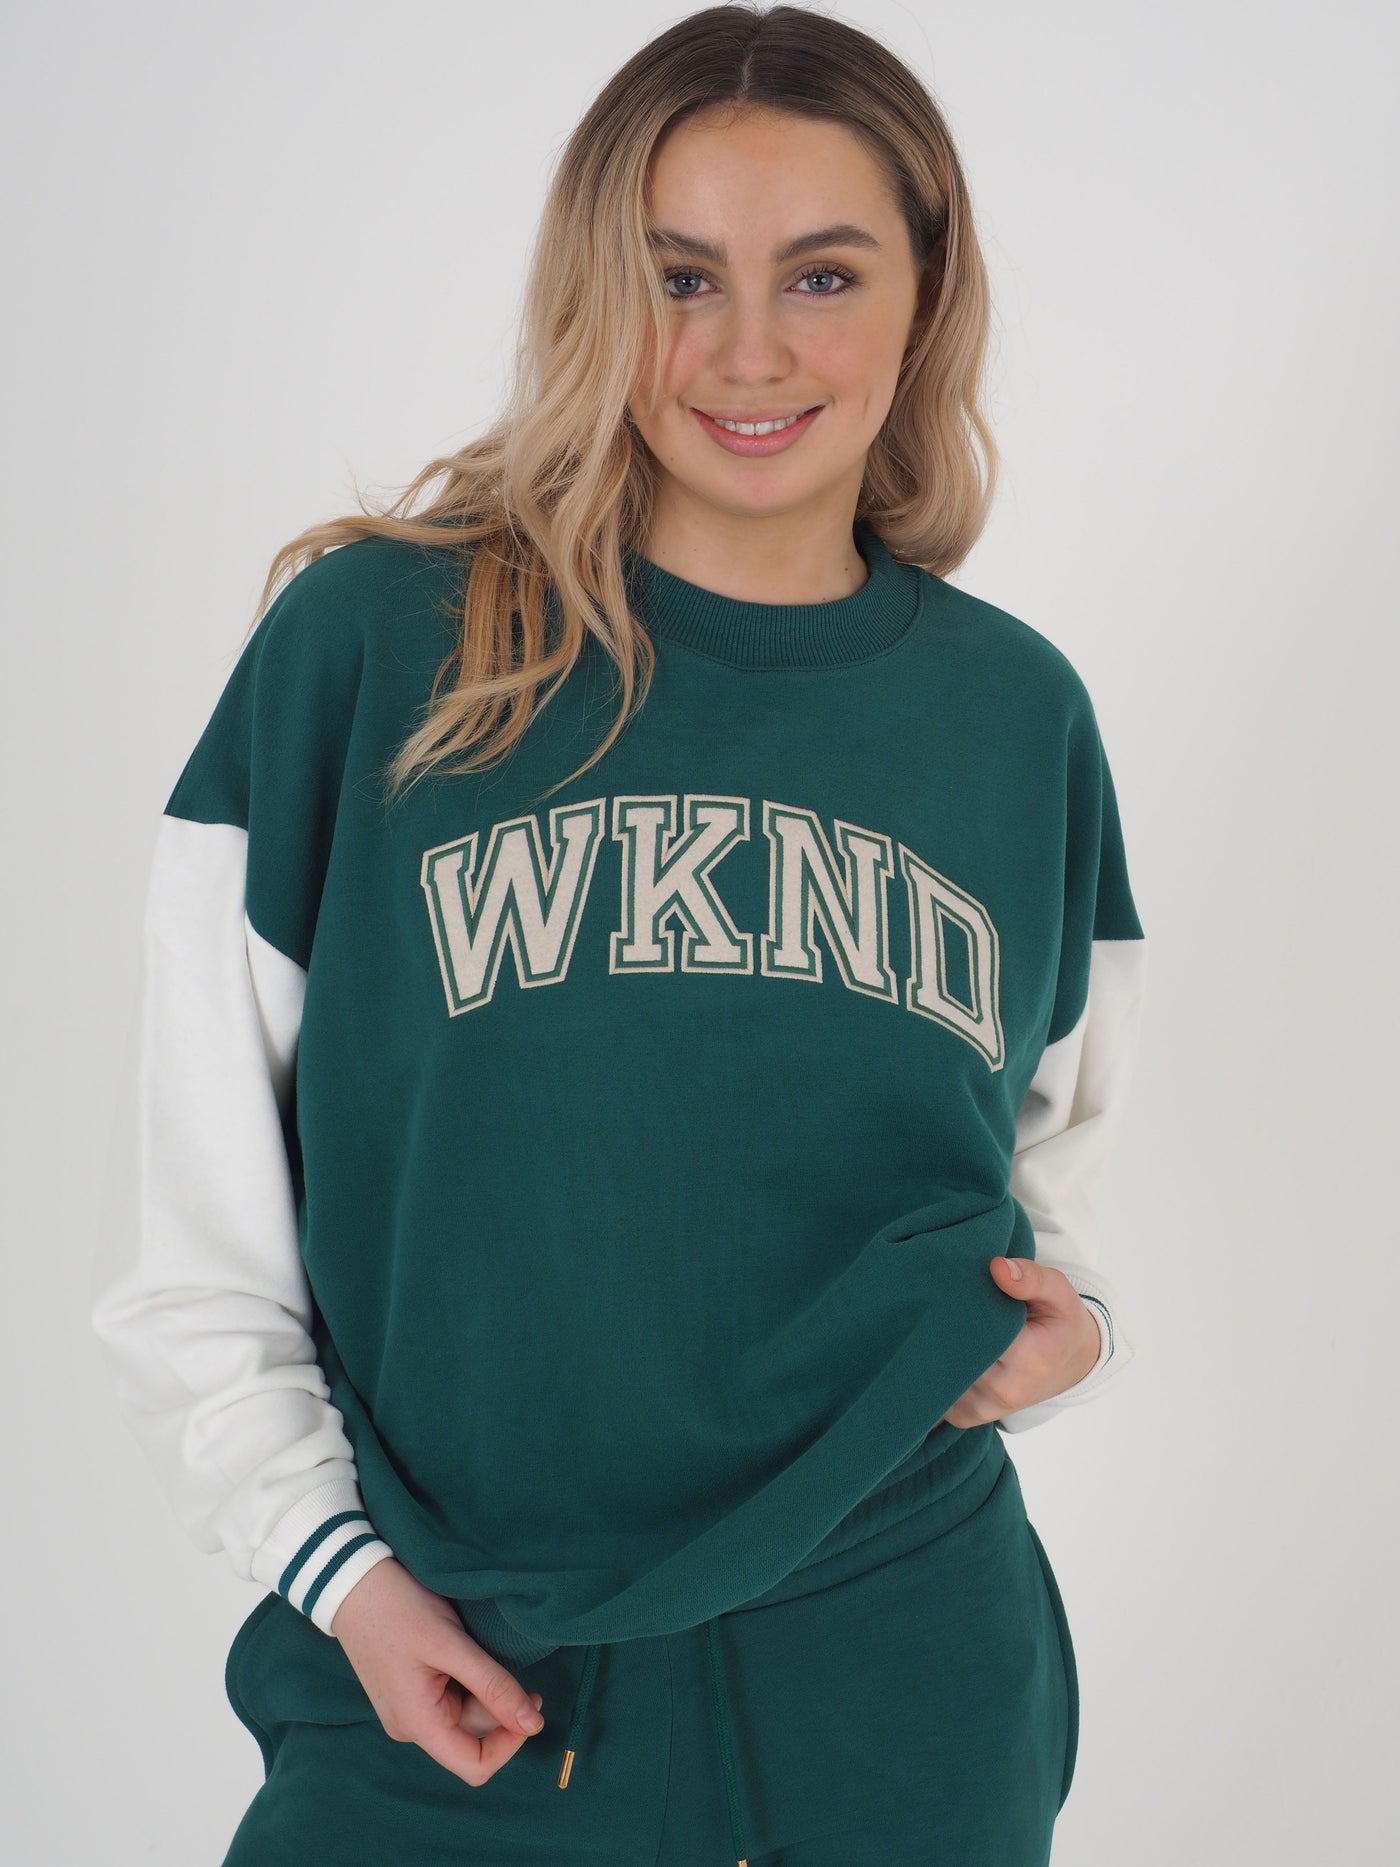 Model with blonde hair wearing a green college varsity style sweatshirt with matching joggers..  Sweatshirt has contrast white sleeves and the text reads WKND.